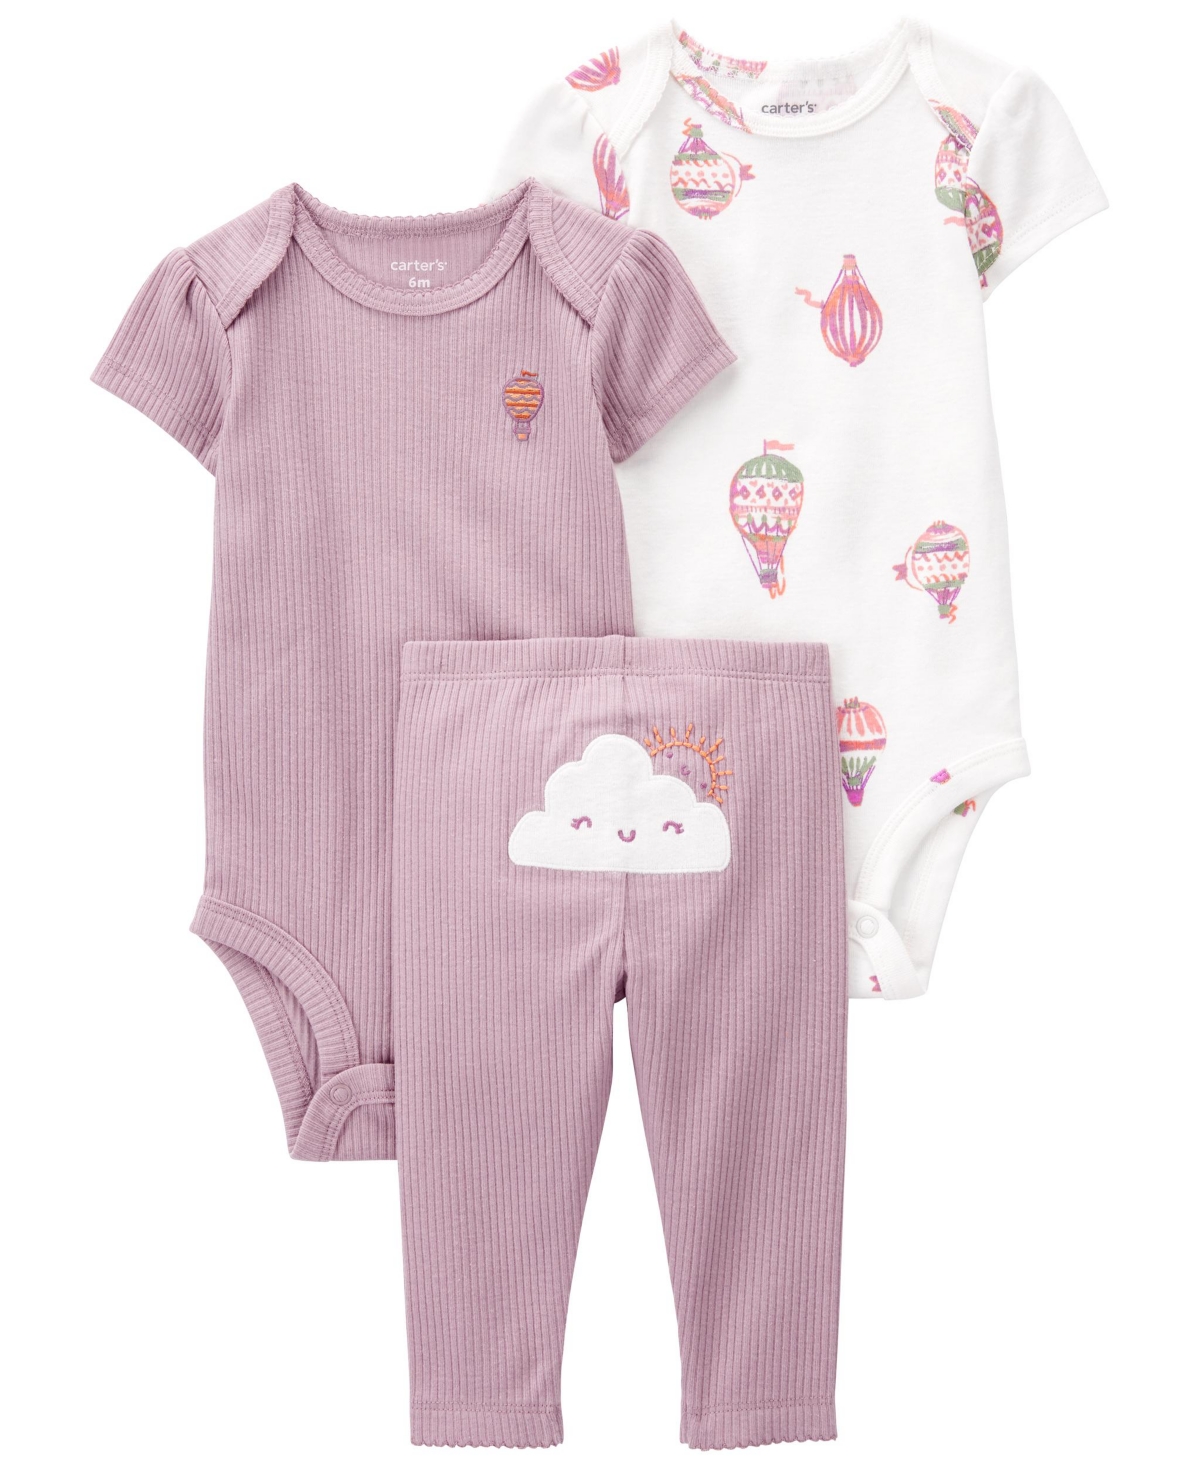 Carter's Baby Girls Cloud Bodysuits And Pants, 3 Piece Set In Purple